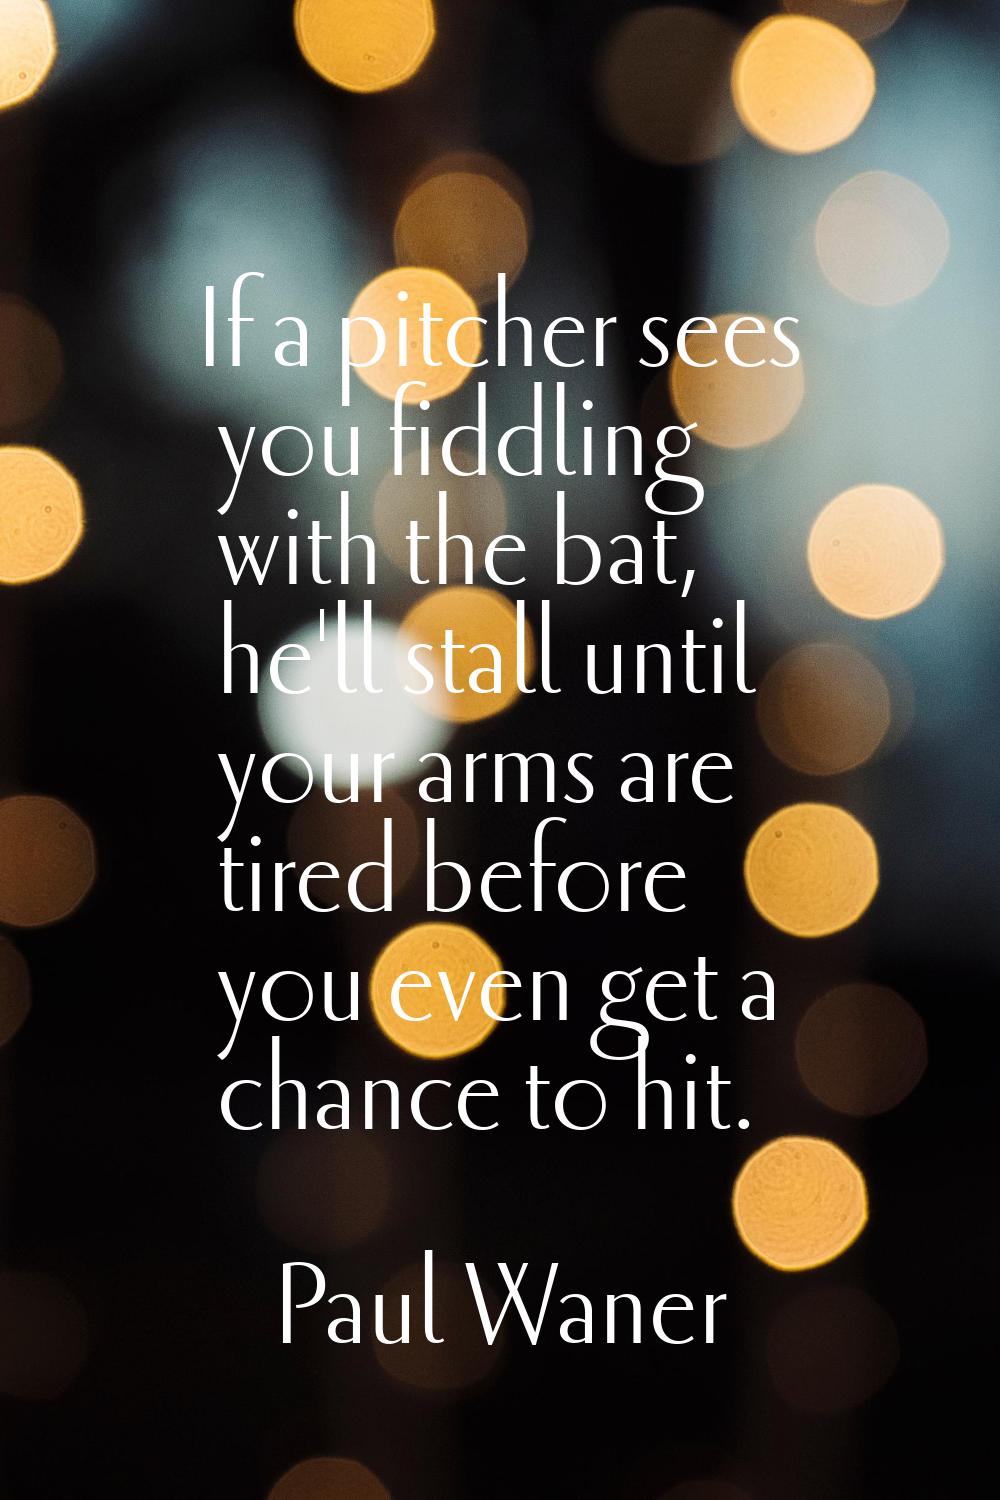 If a pitcher sees you fiddling with the bat, he'll stall until your arms are tired before you even 